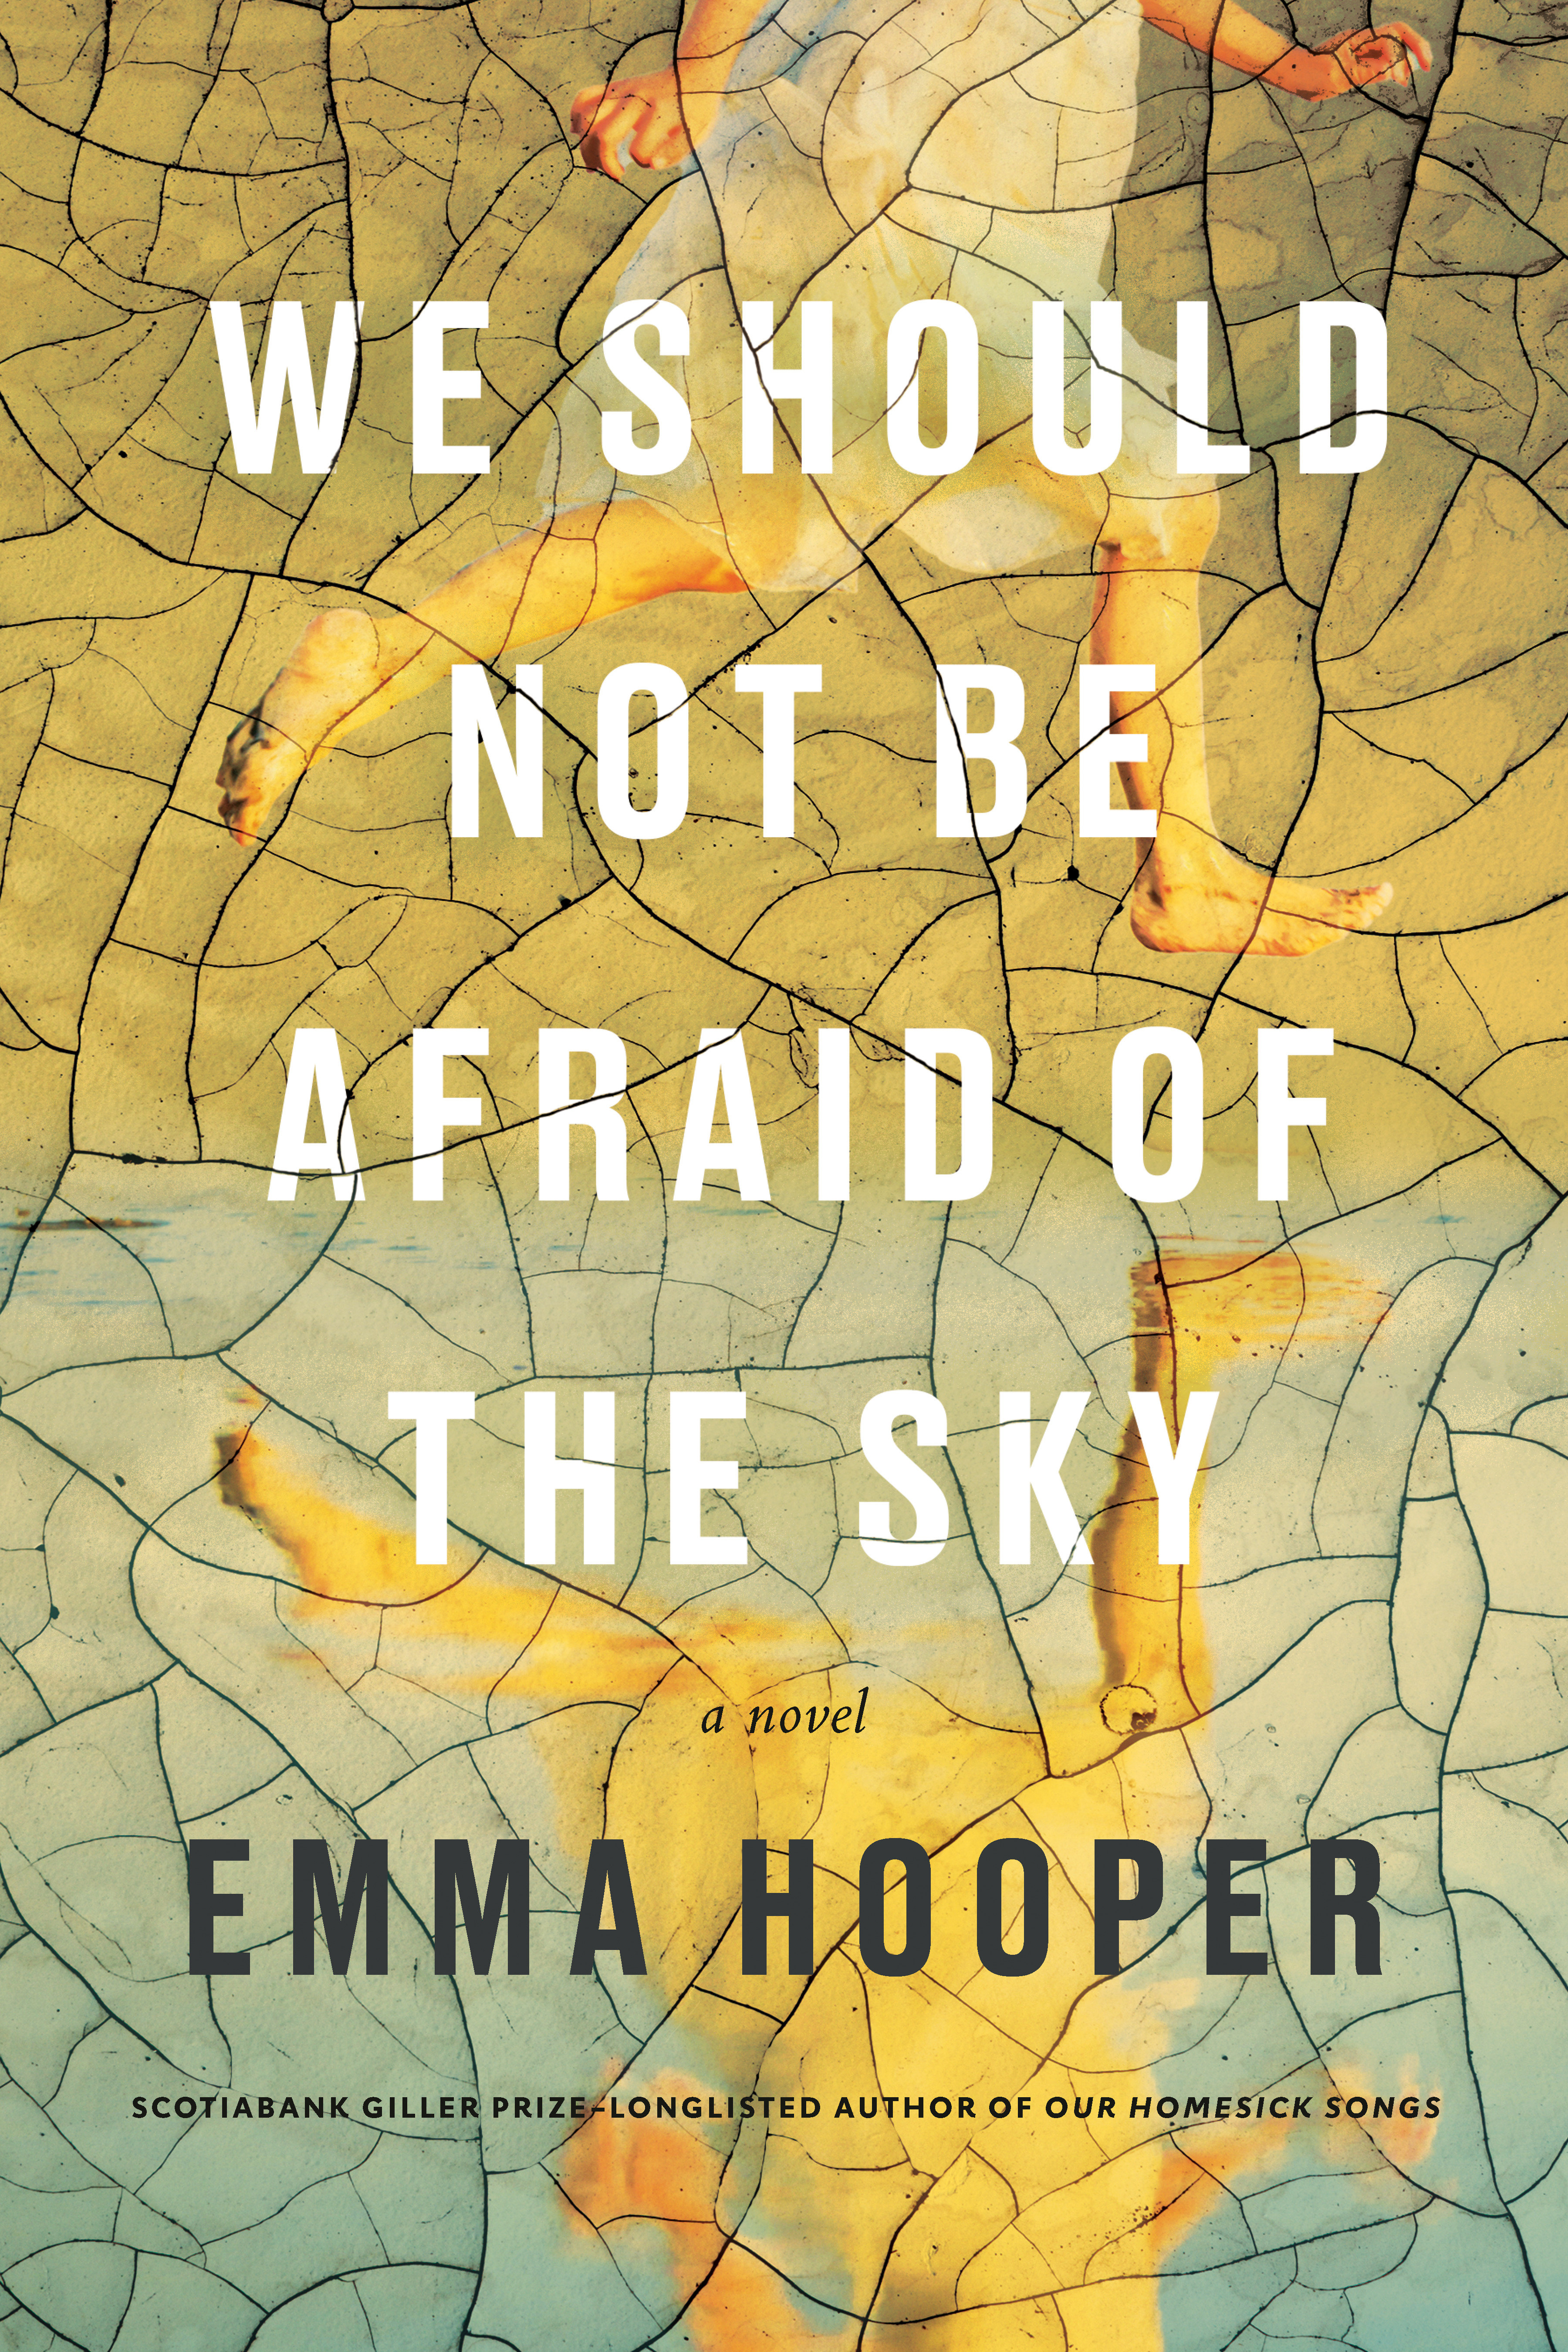 We Should Not Be Afraid Of The Sky (Hardcover Book)